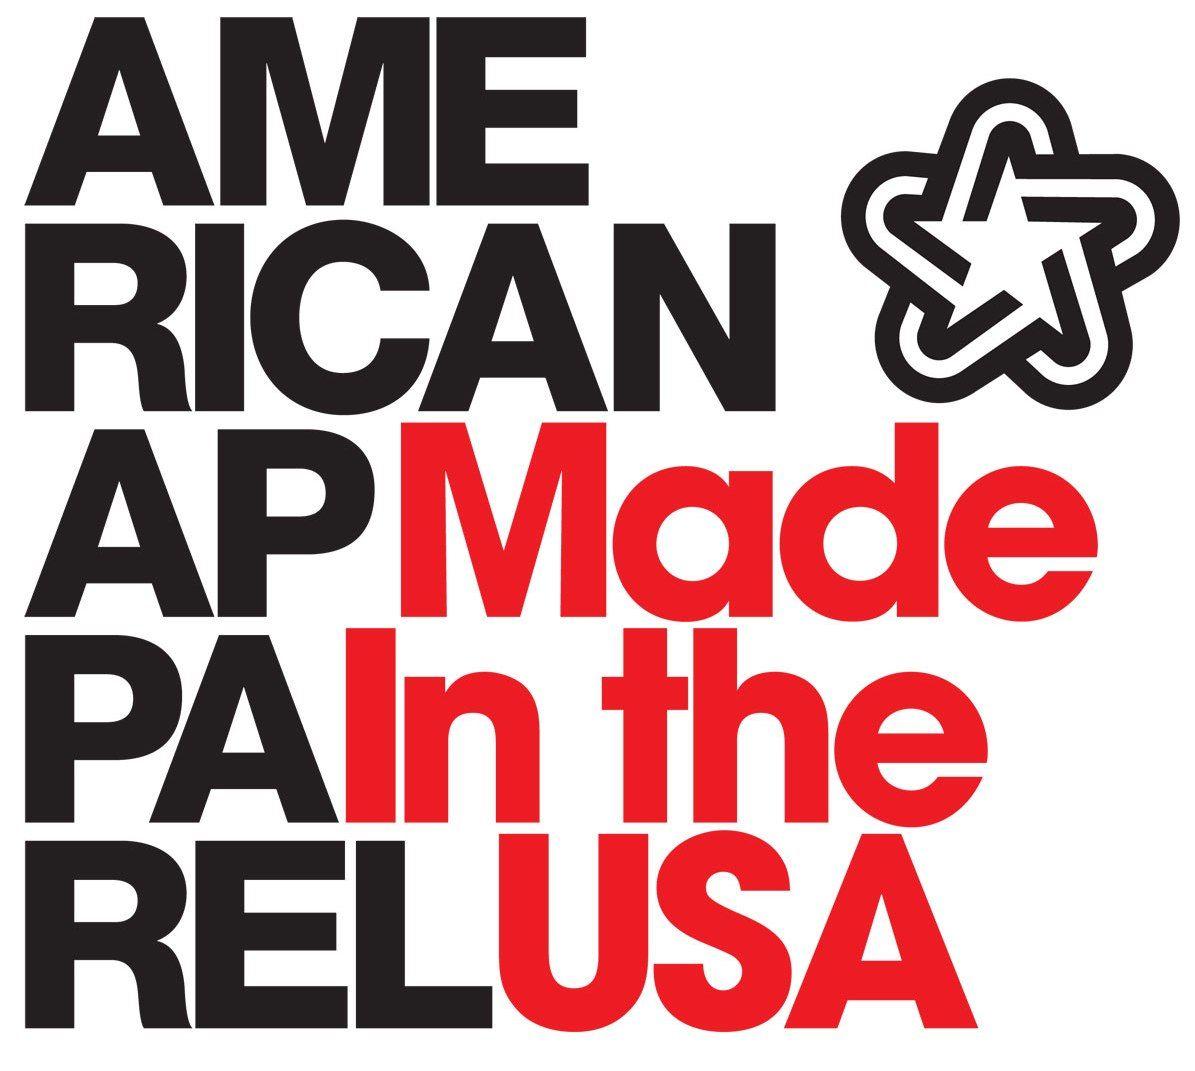 American Apparel Logo - American Apparel: Too Thin and Too?. UMKC Women's Center